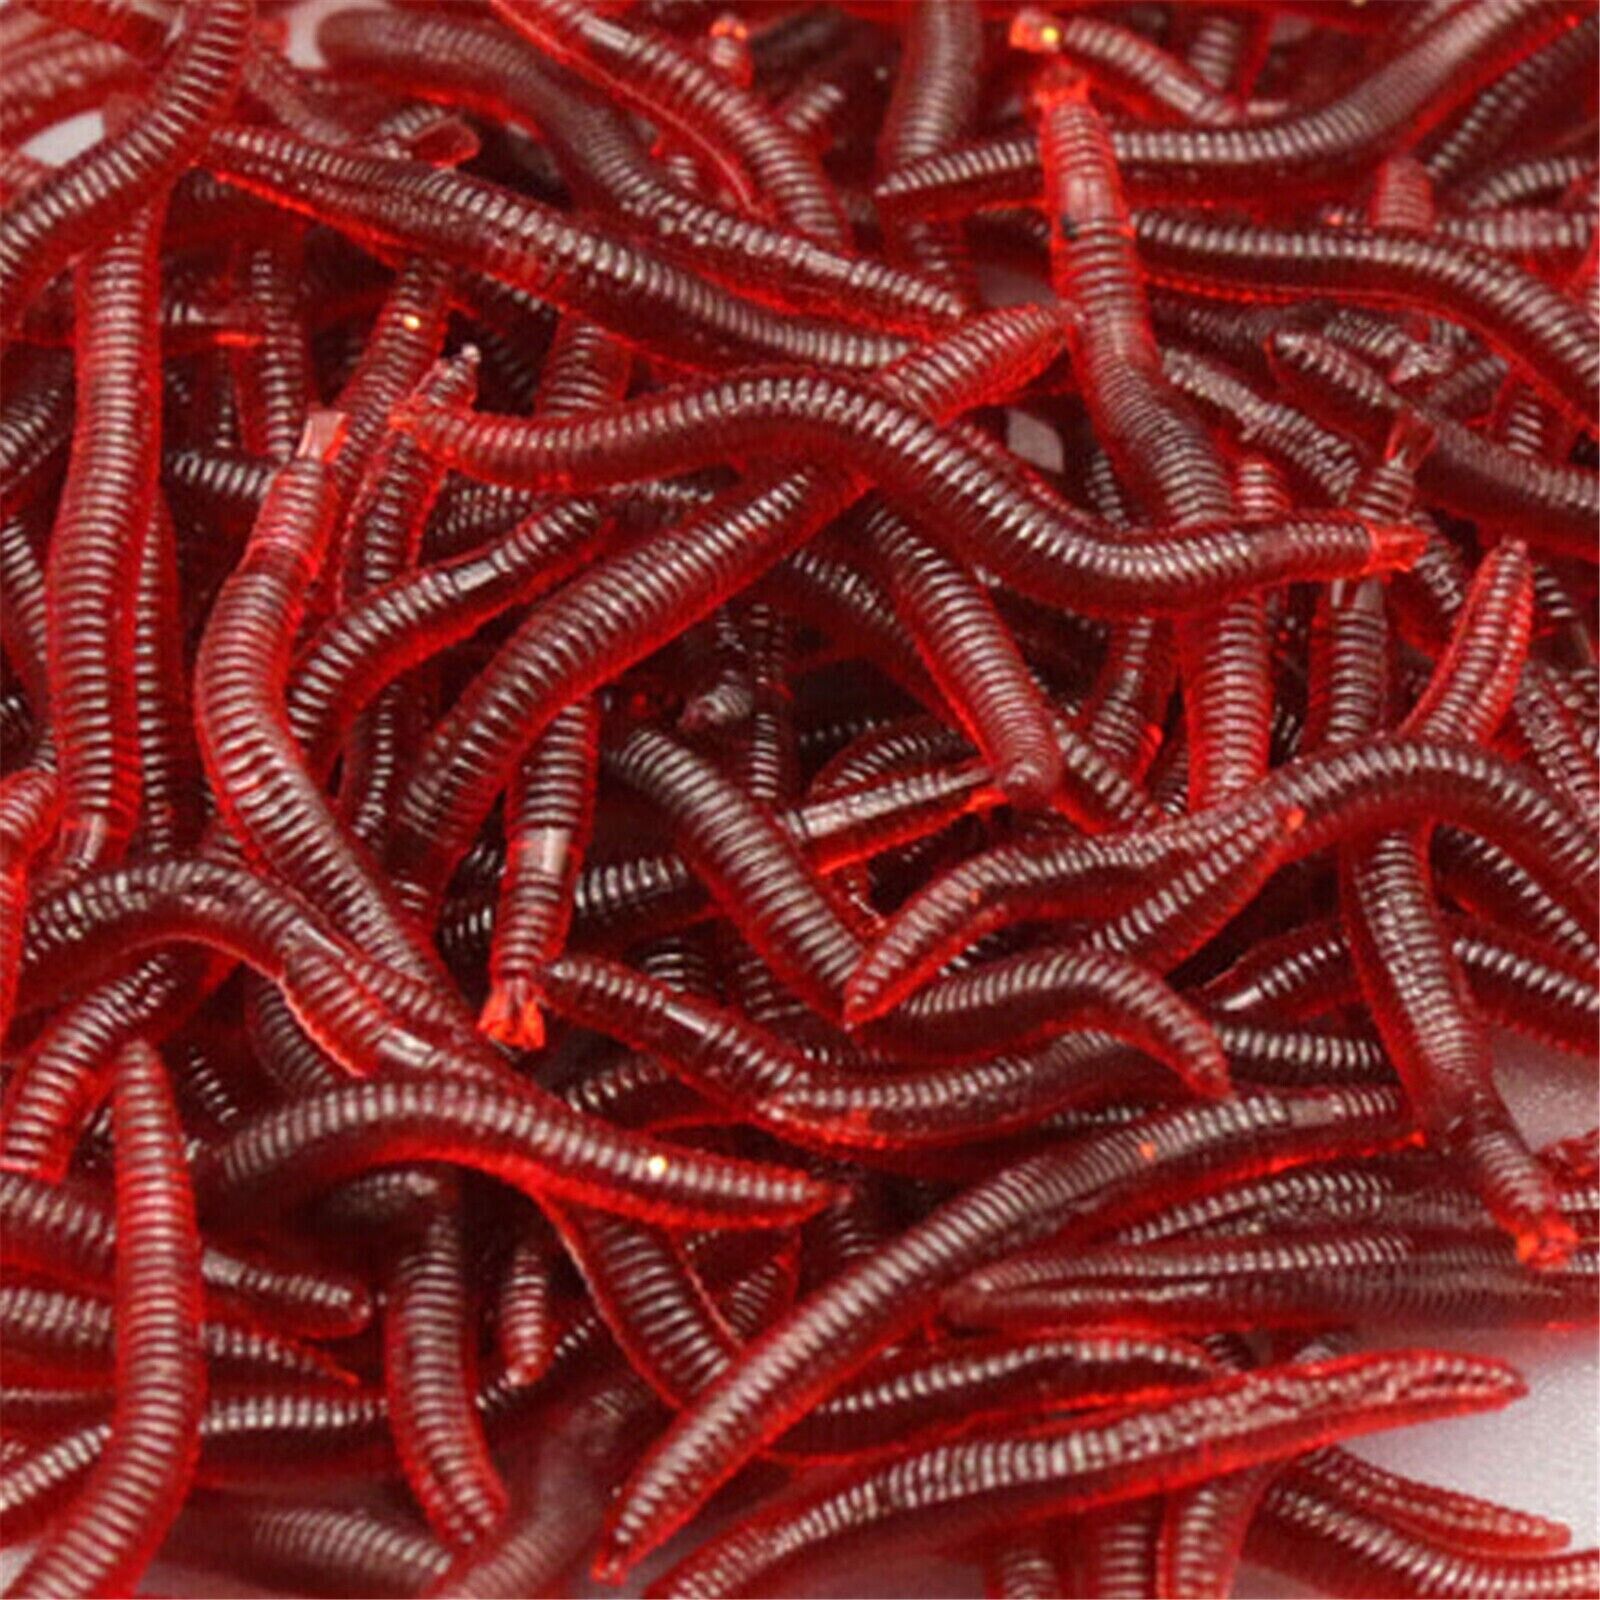 50x Bloodworm Soft Plastic Lure Fishing Worm Bait Red Bloodworms Whiti –  Acos eCommerce Group